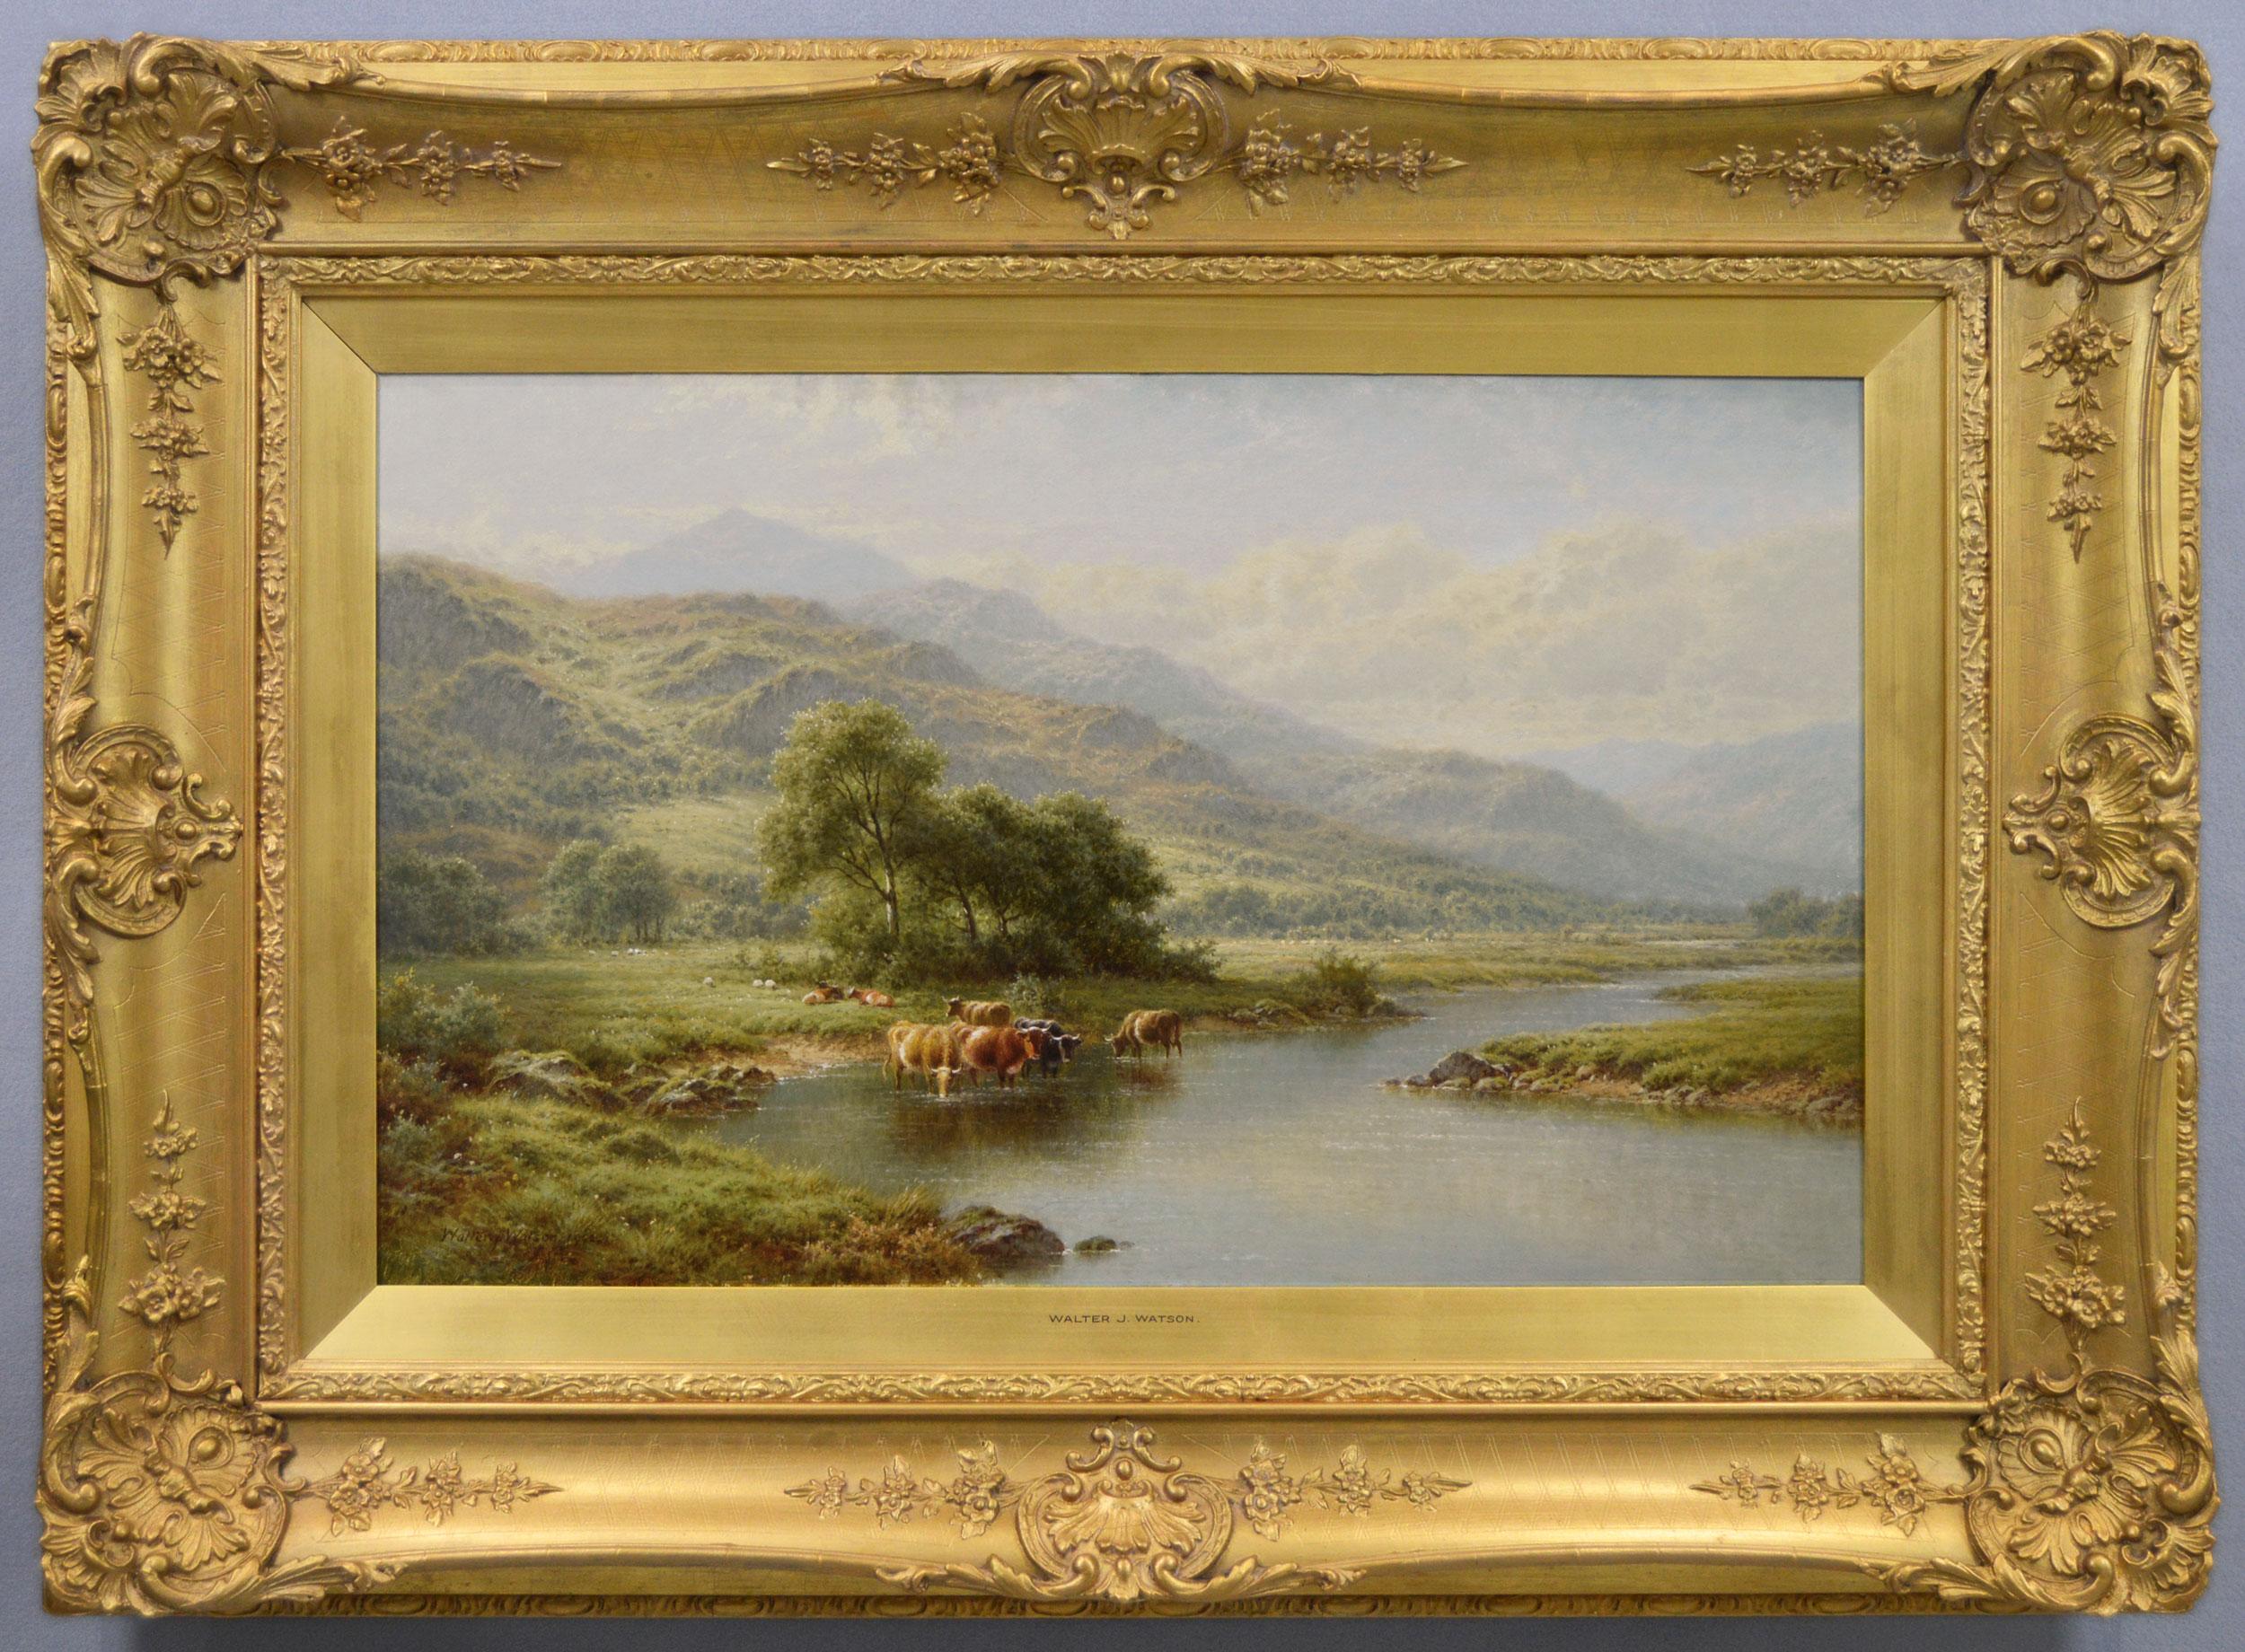 Walter J Watson Landscape Painting - Welsh landscape oil painting of cattle by the River Llugwy, North Wales